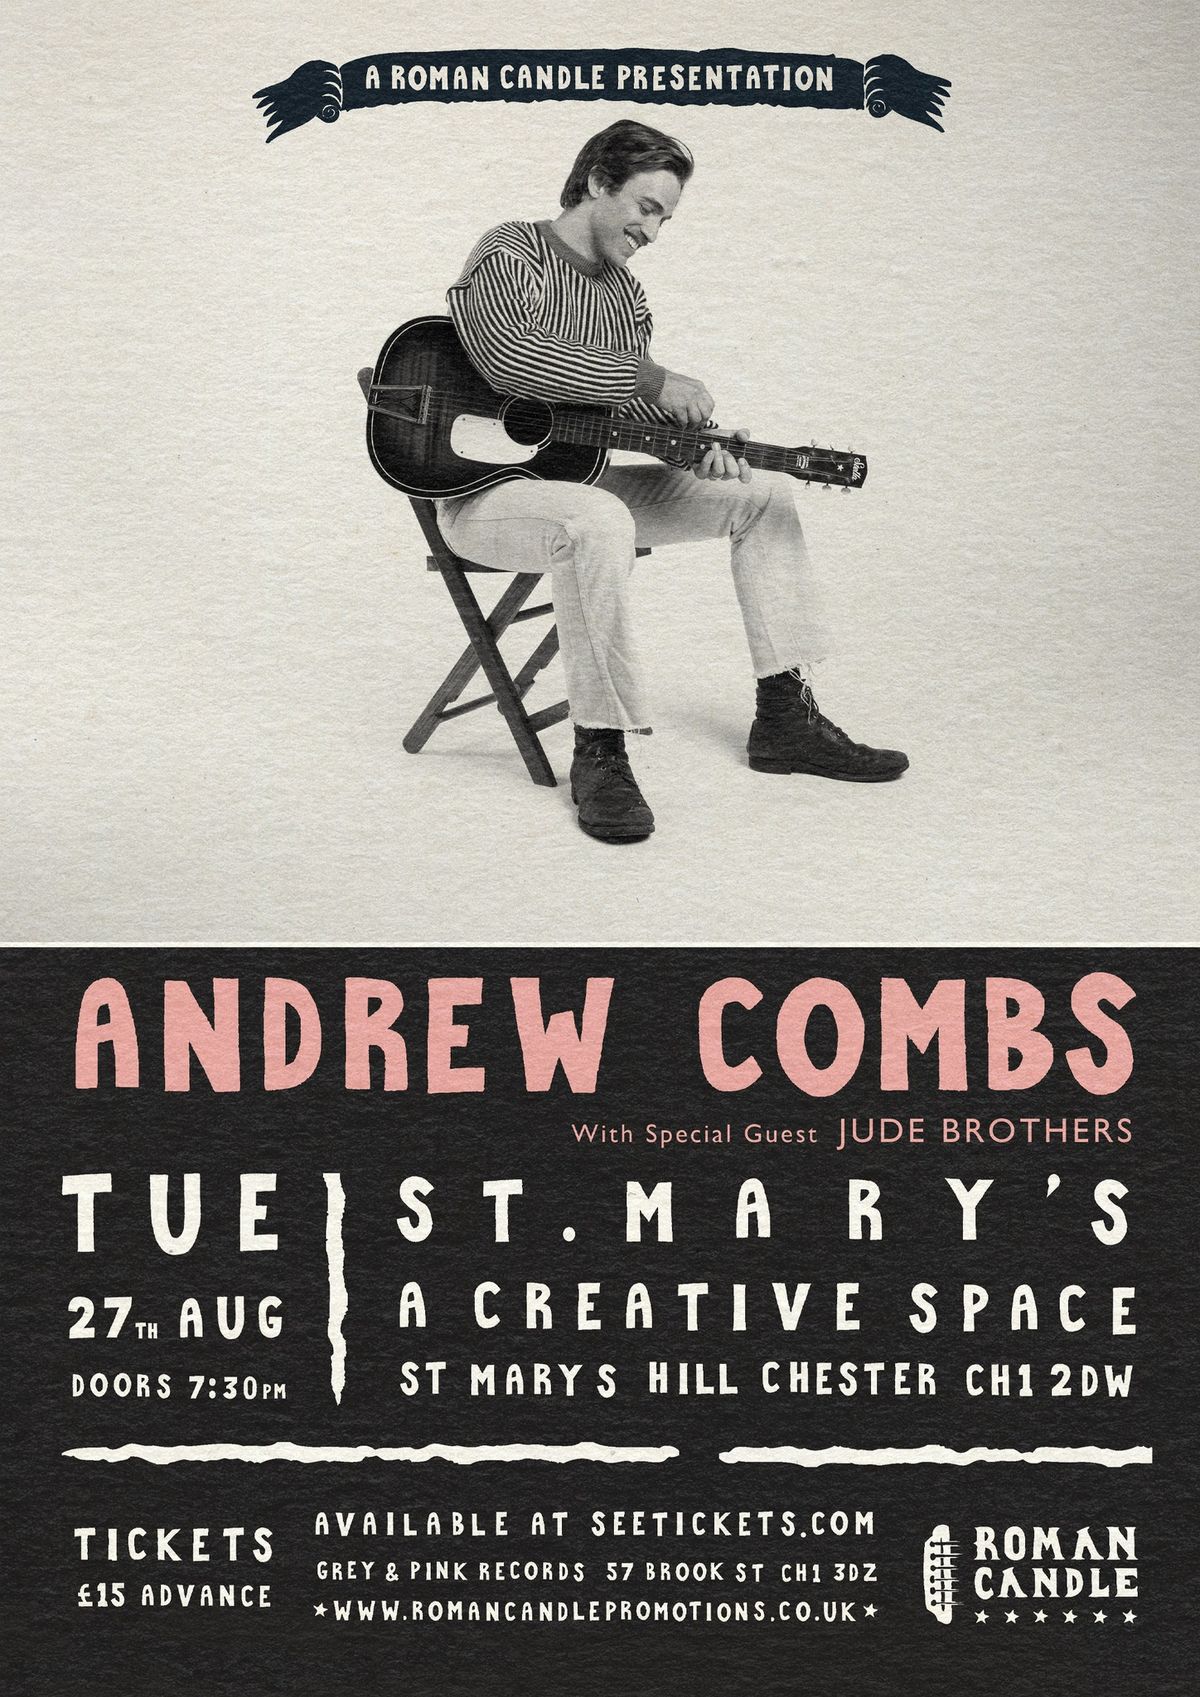 Roman Candle Presents Andrew Combs